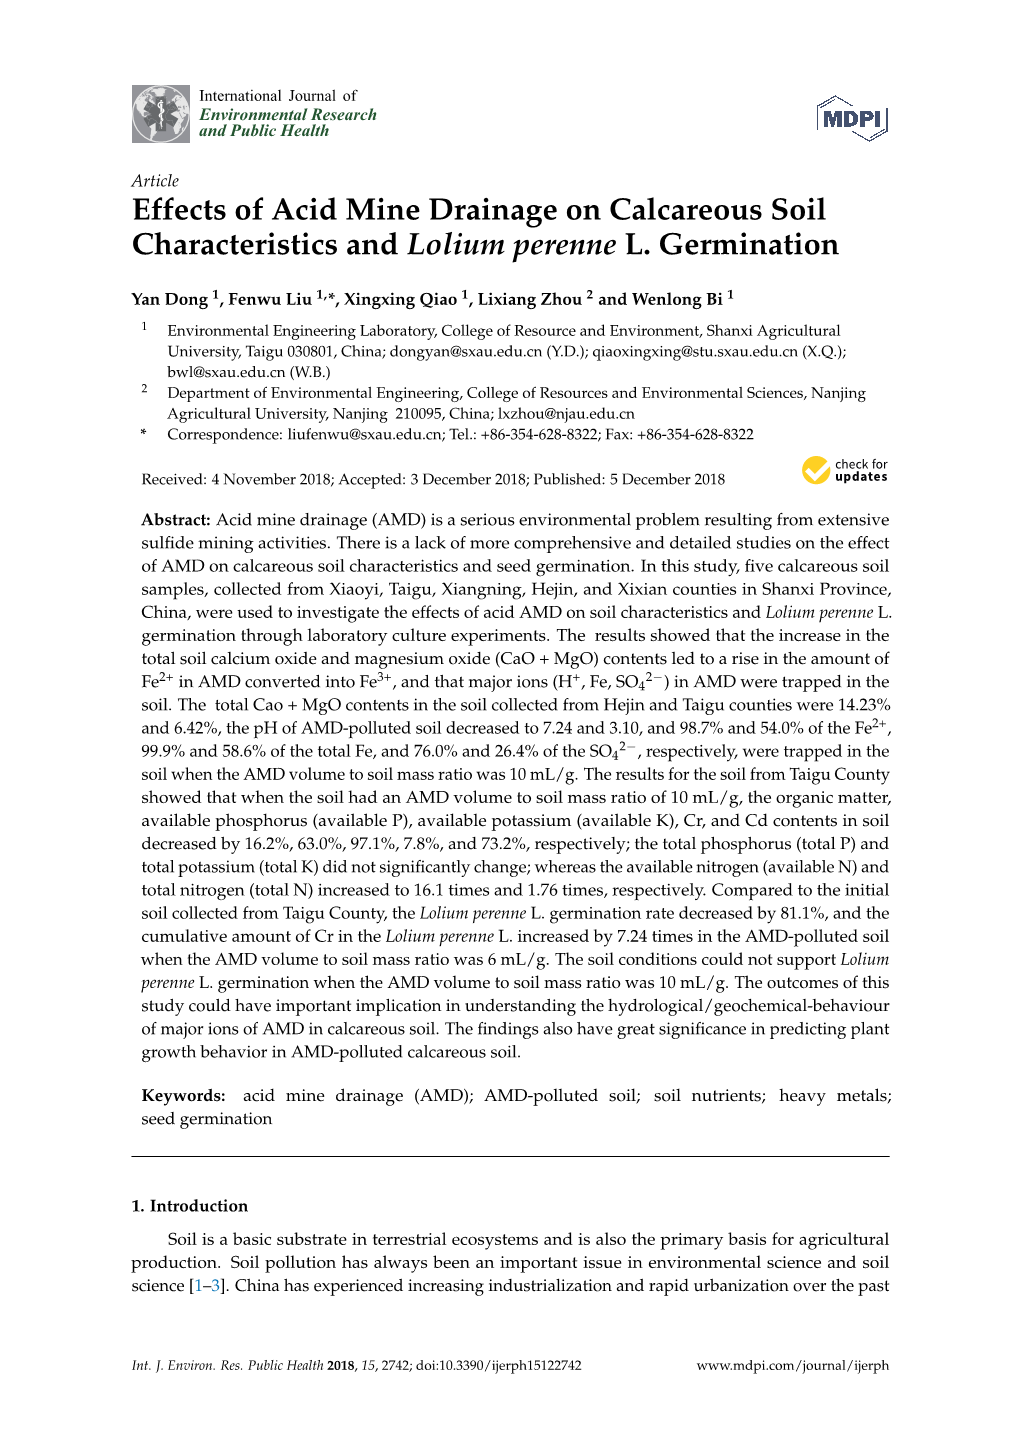 Effects of Acid Mine Drainage on Calcareous Soil Characteristics and Lolium Perenne L